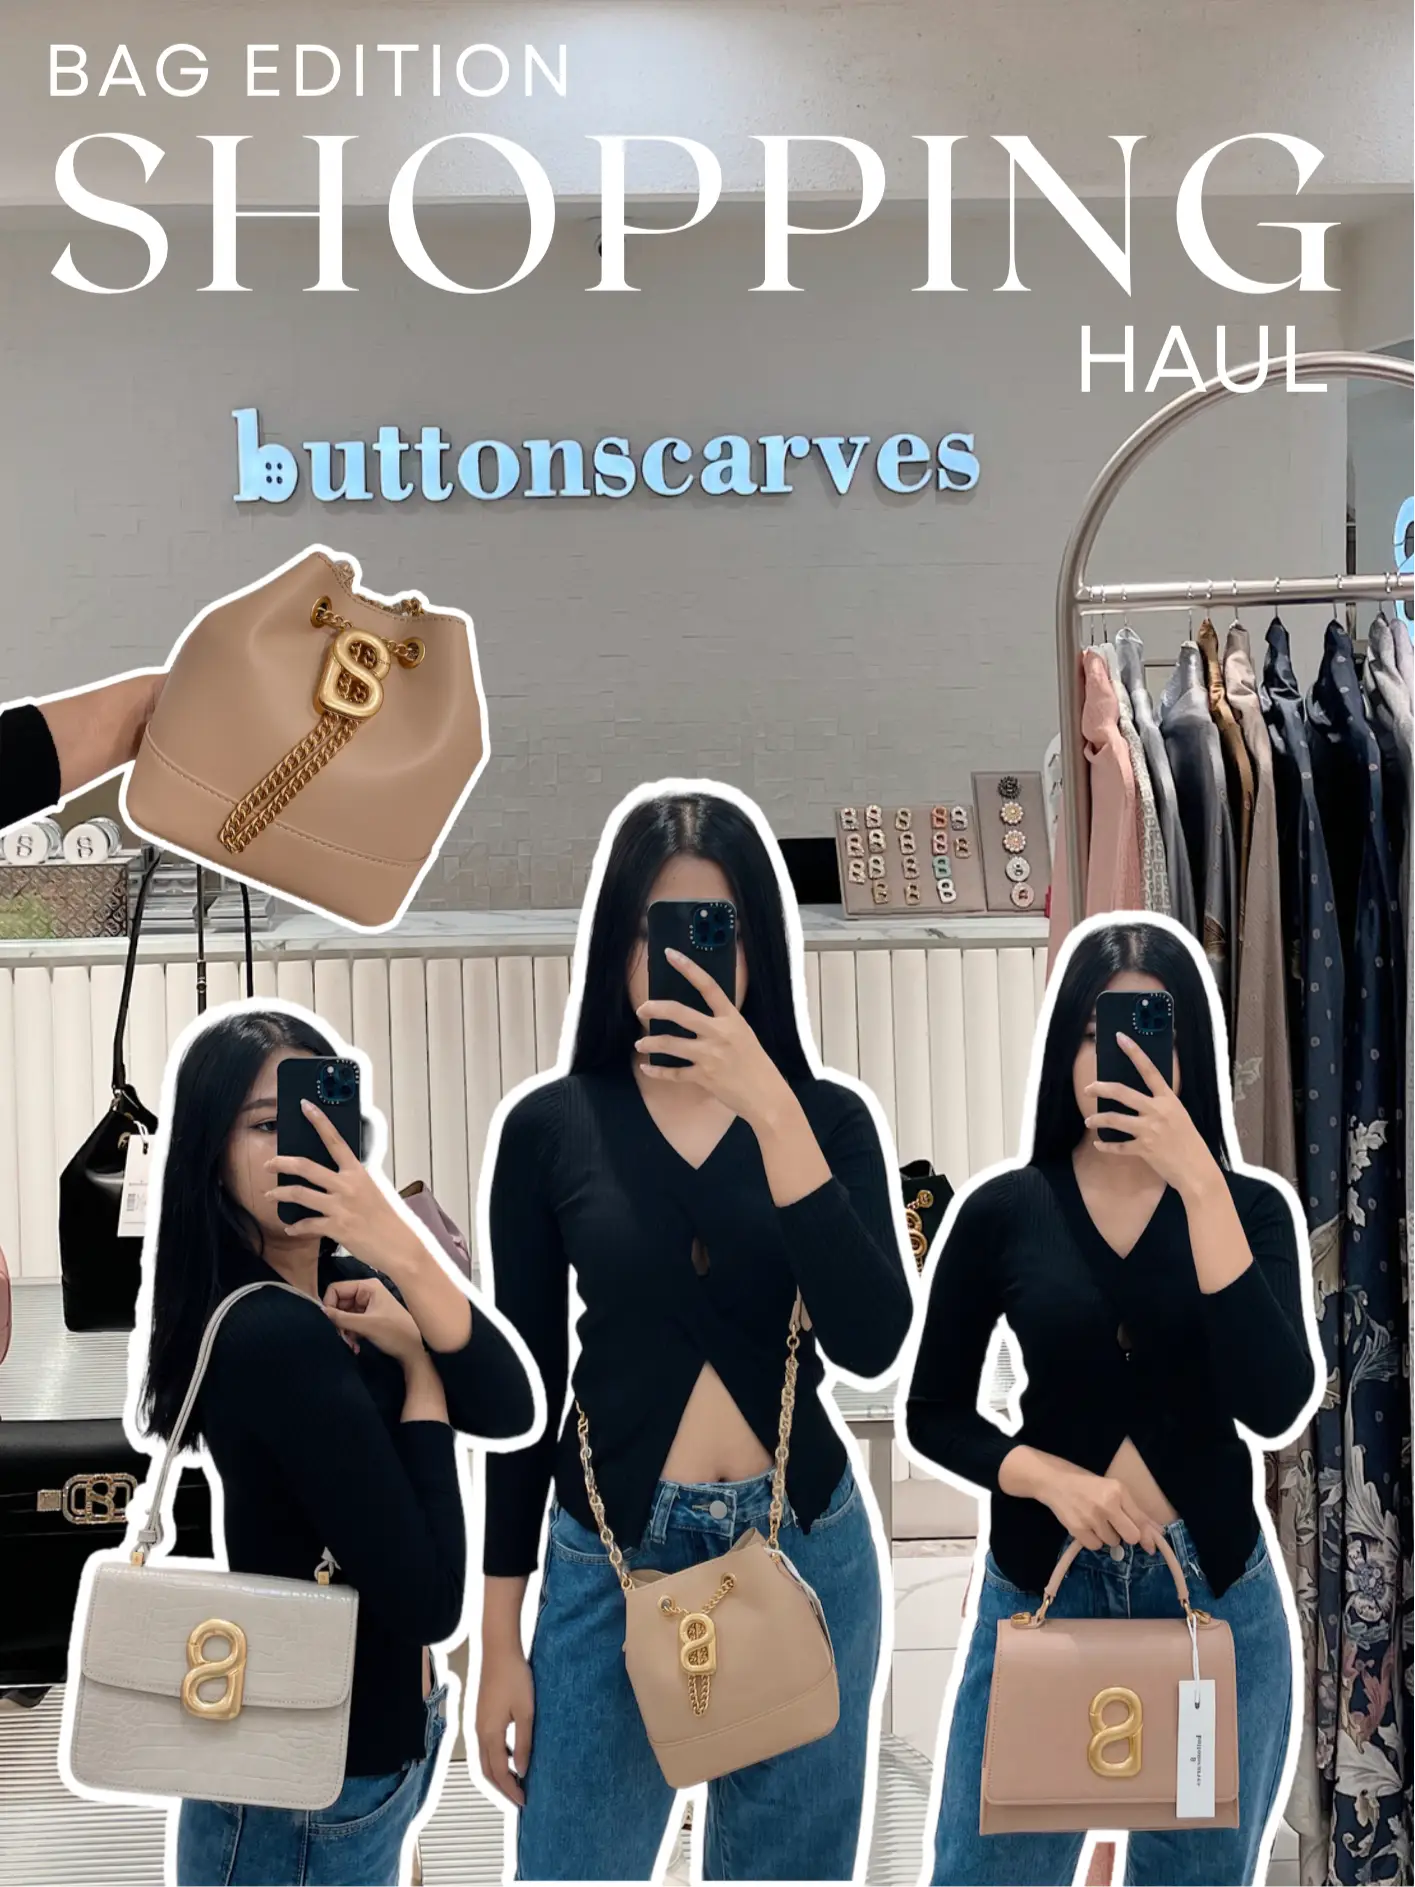 BUTTONSCARVES BAG, SHOPPING HAUL, Gallery posted by Thalita Zhafira